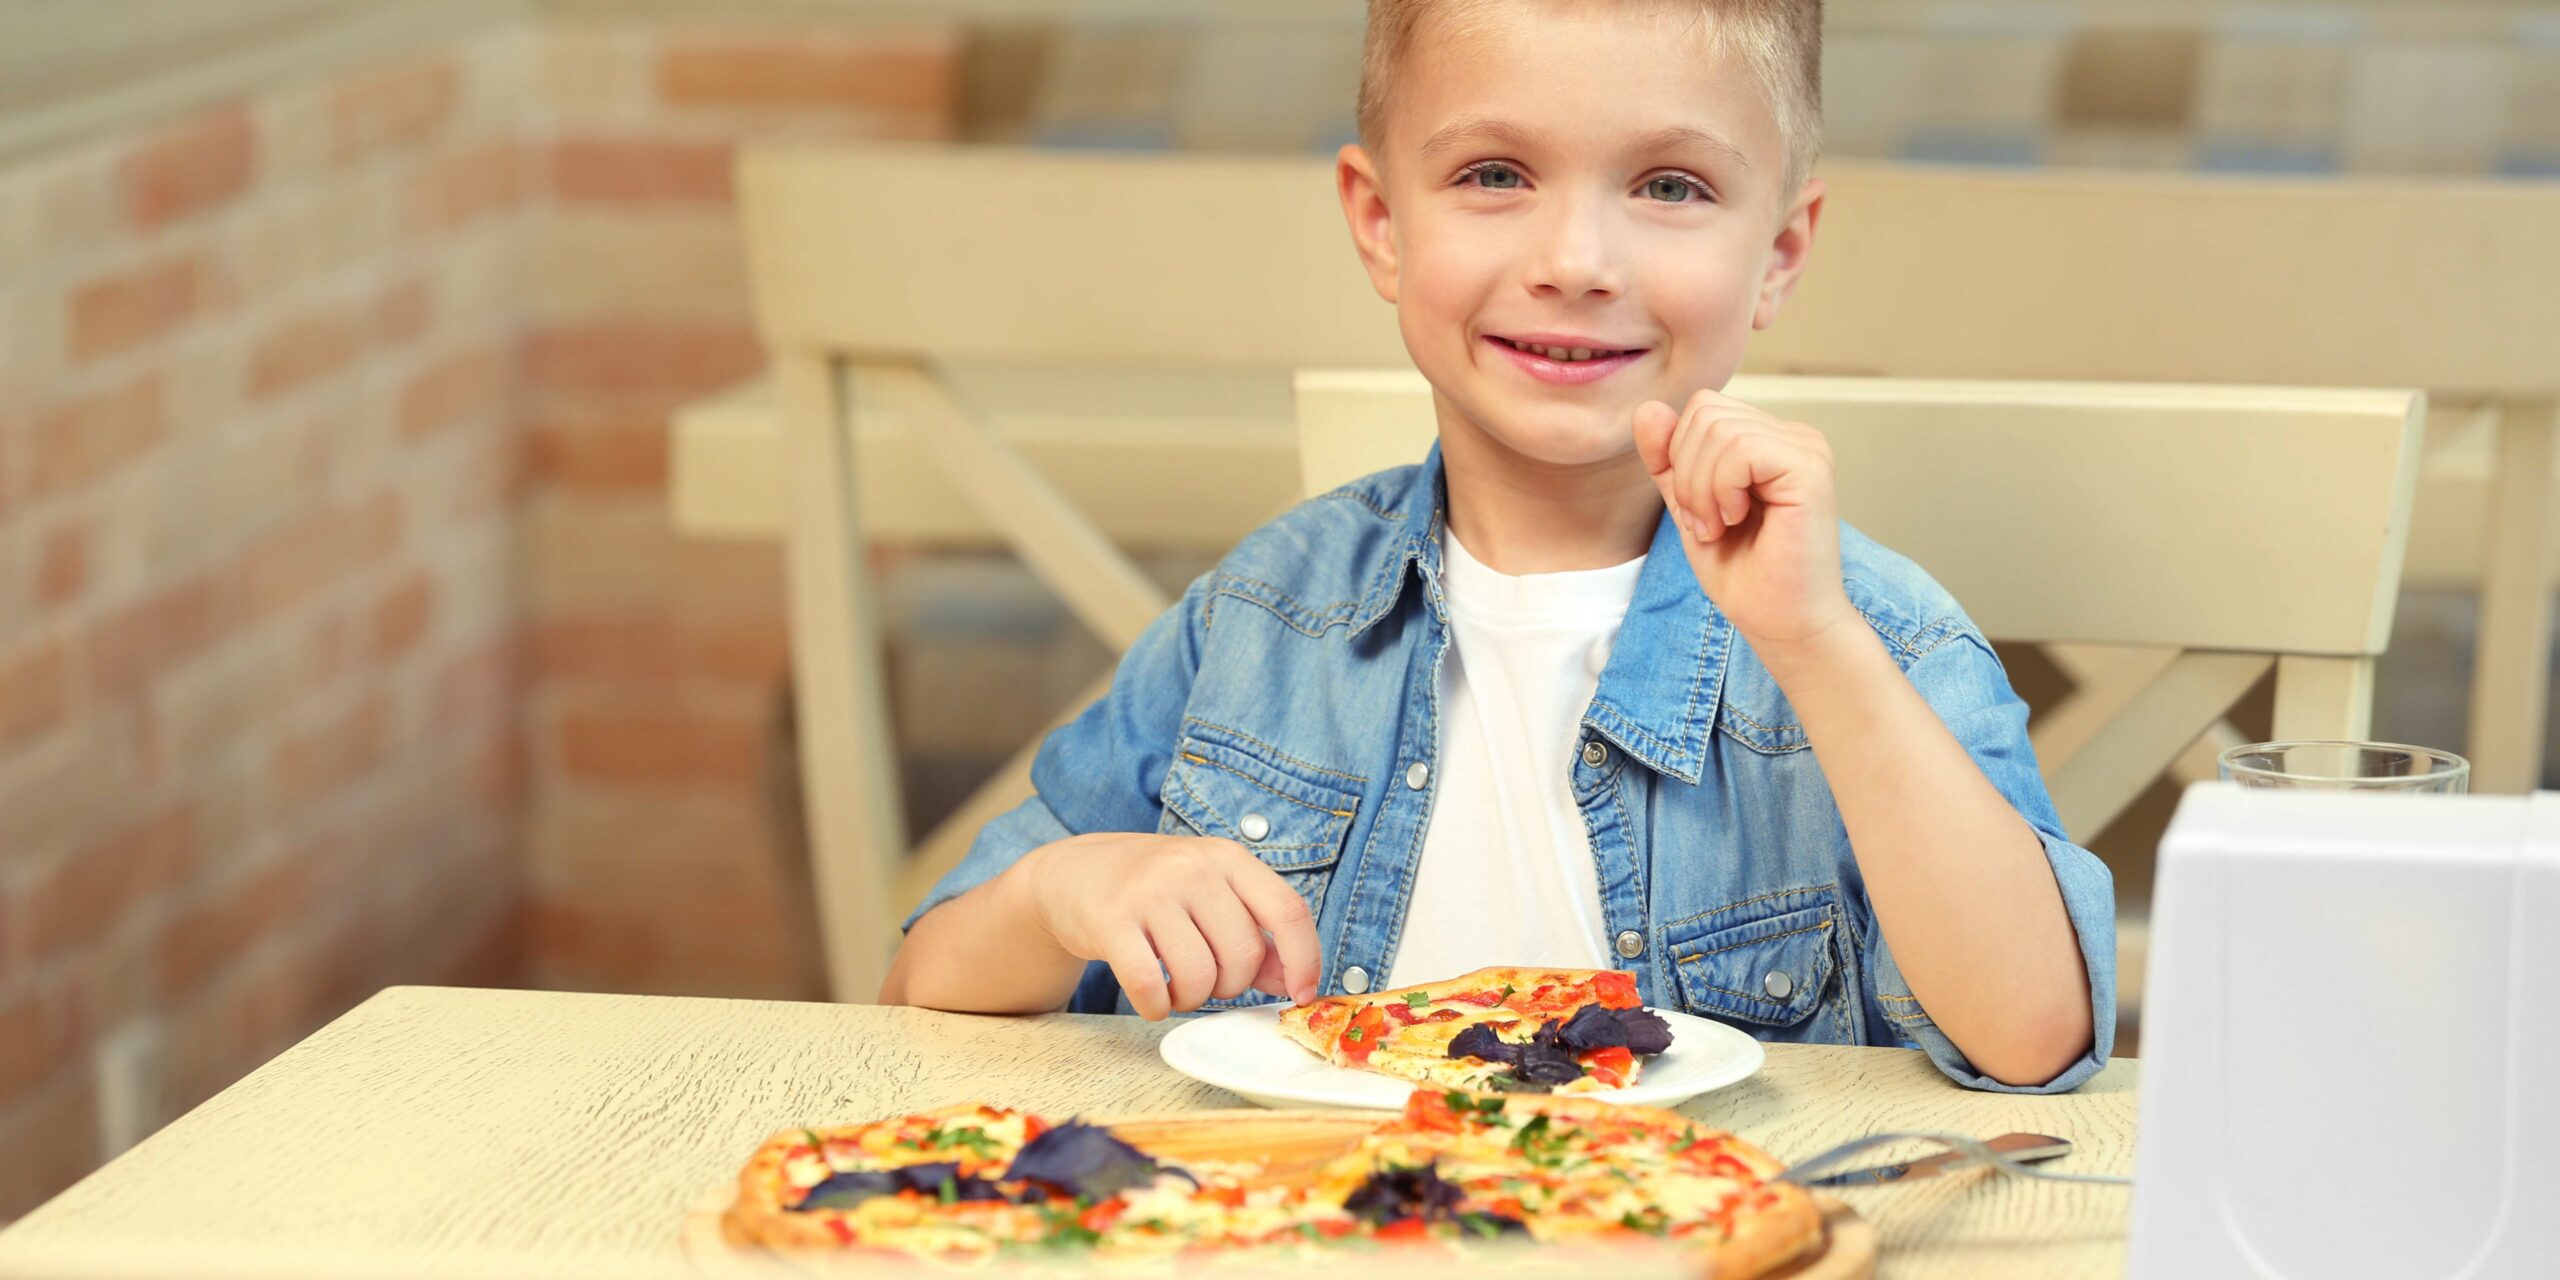 Tips For Eating Out With Young Kids